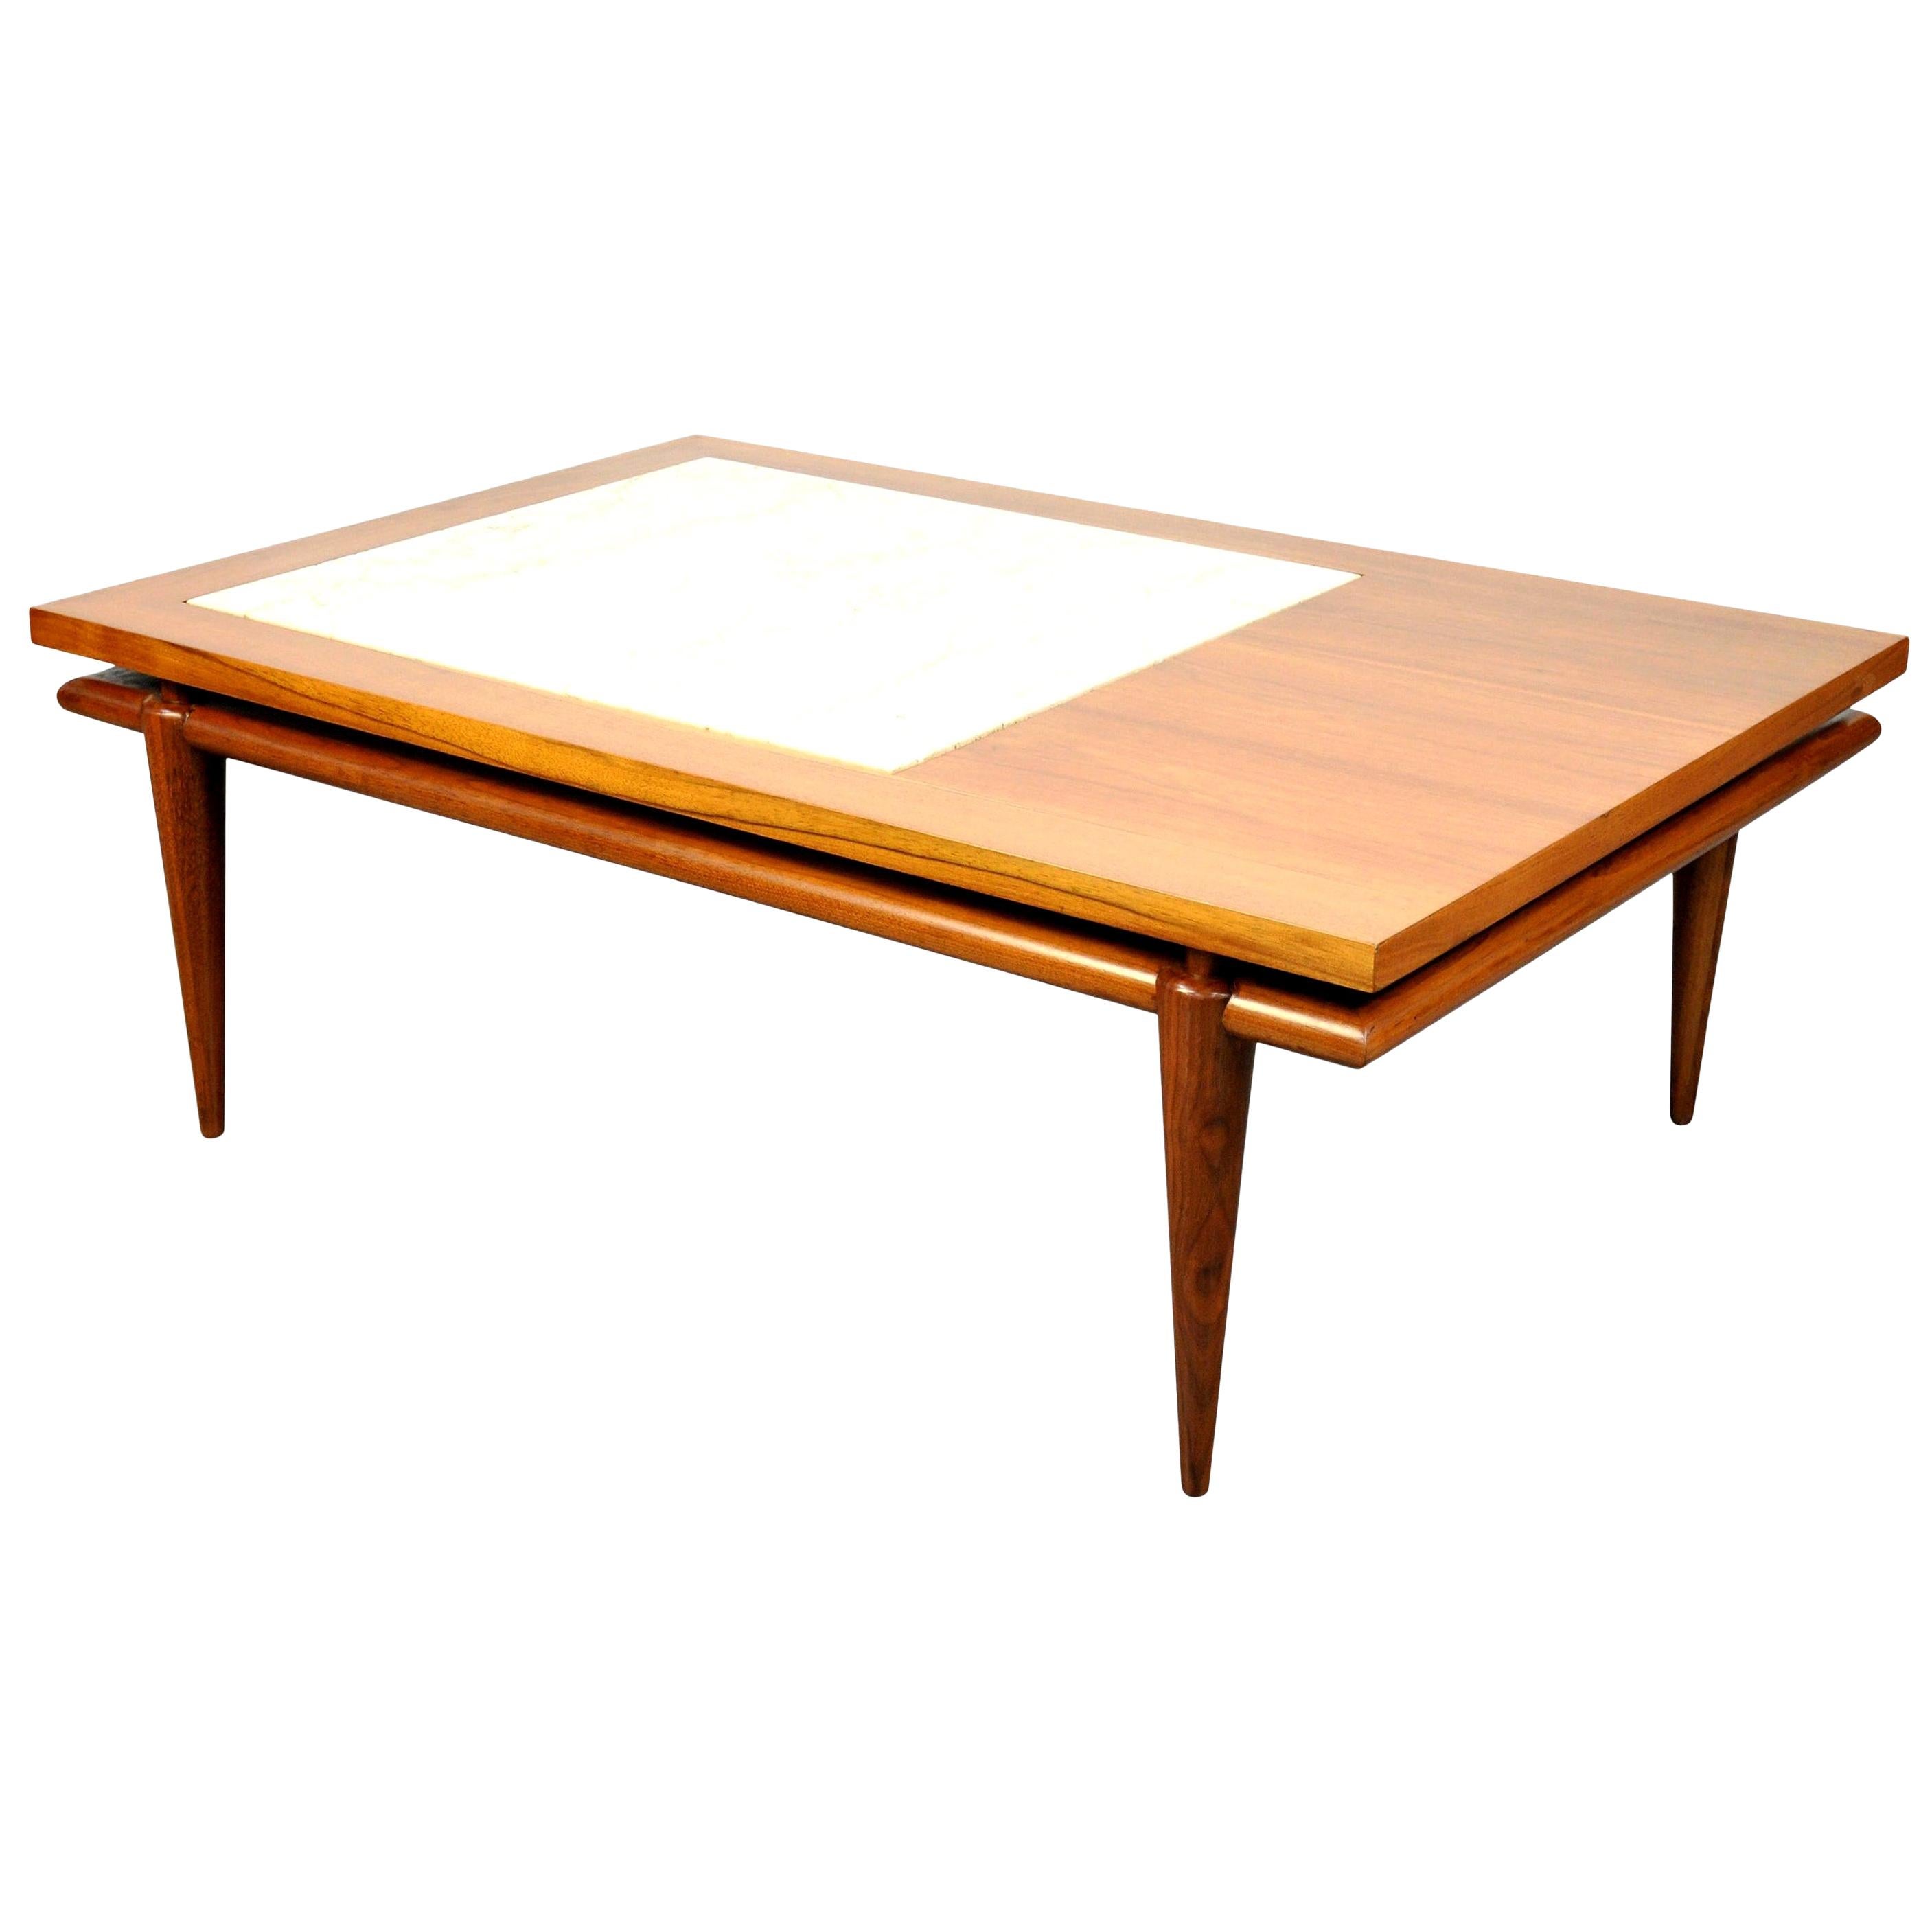 American Widdicomb Walnut and Travertine Coffee Table with Floating Top, 1960s